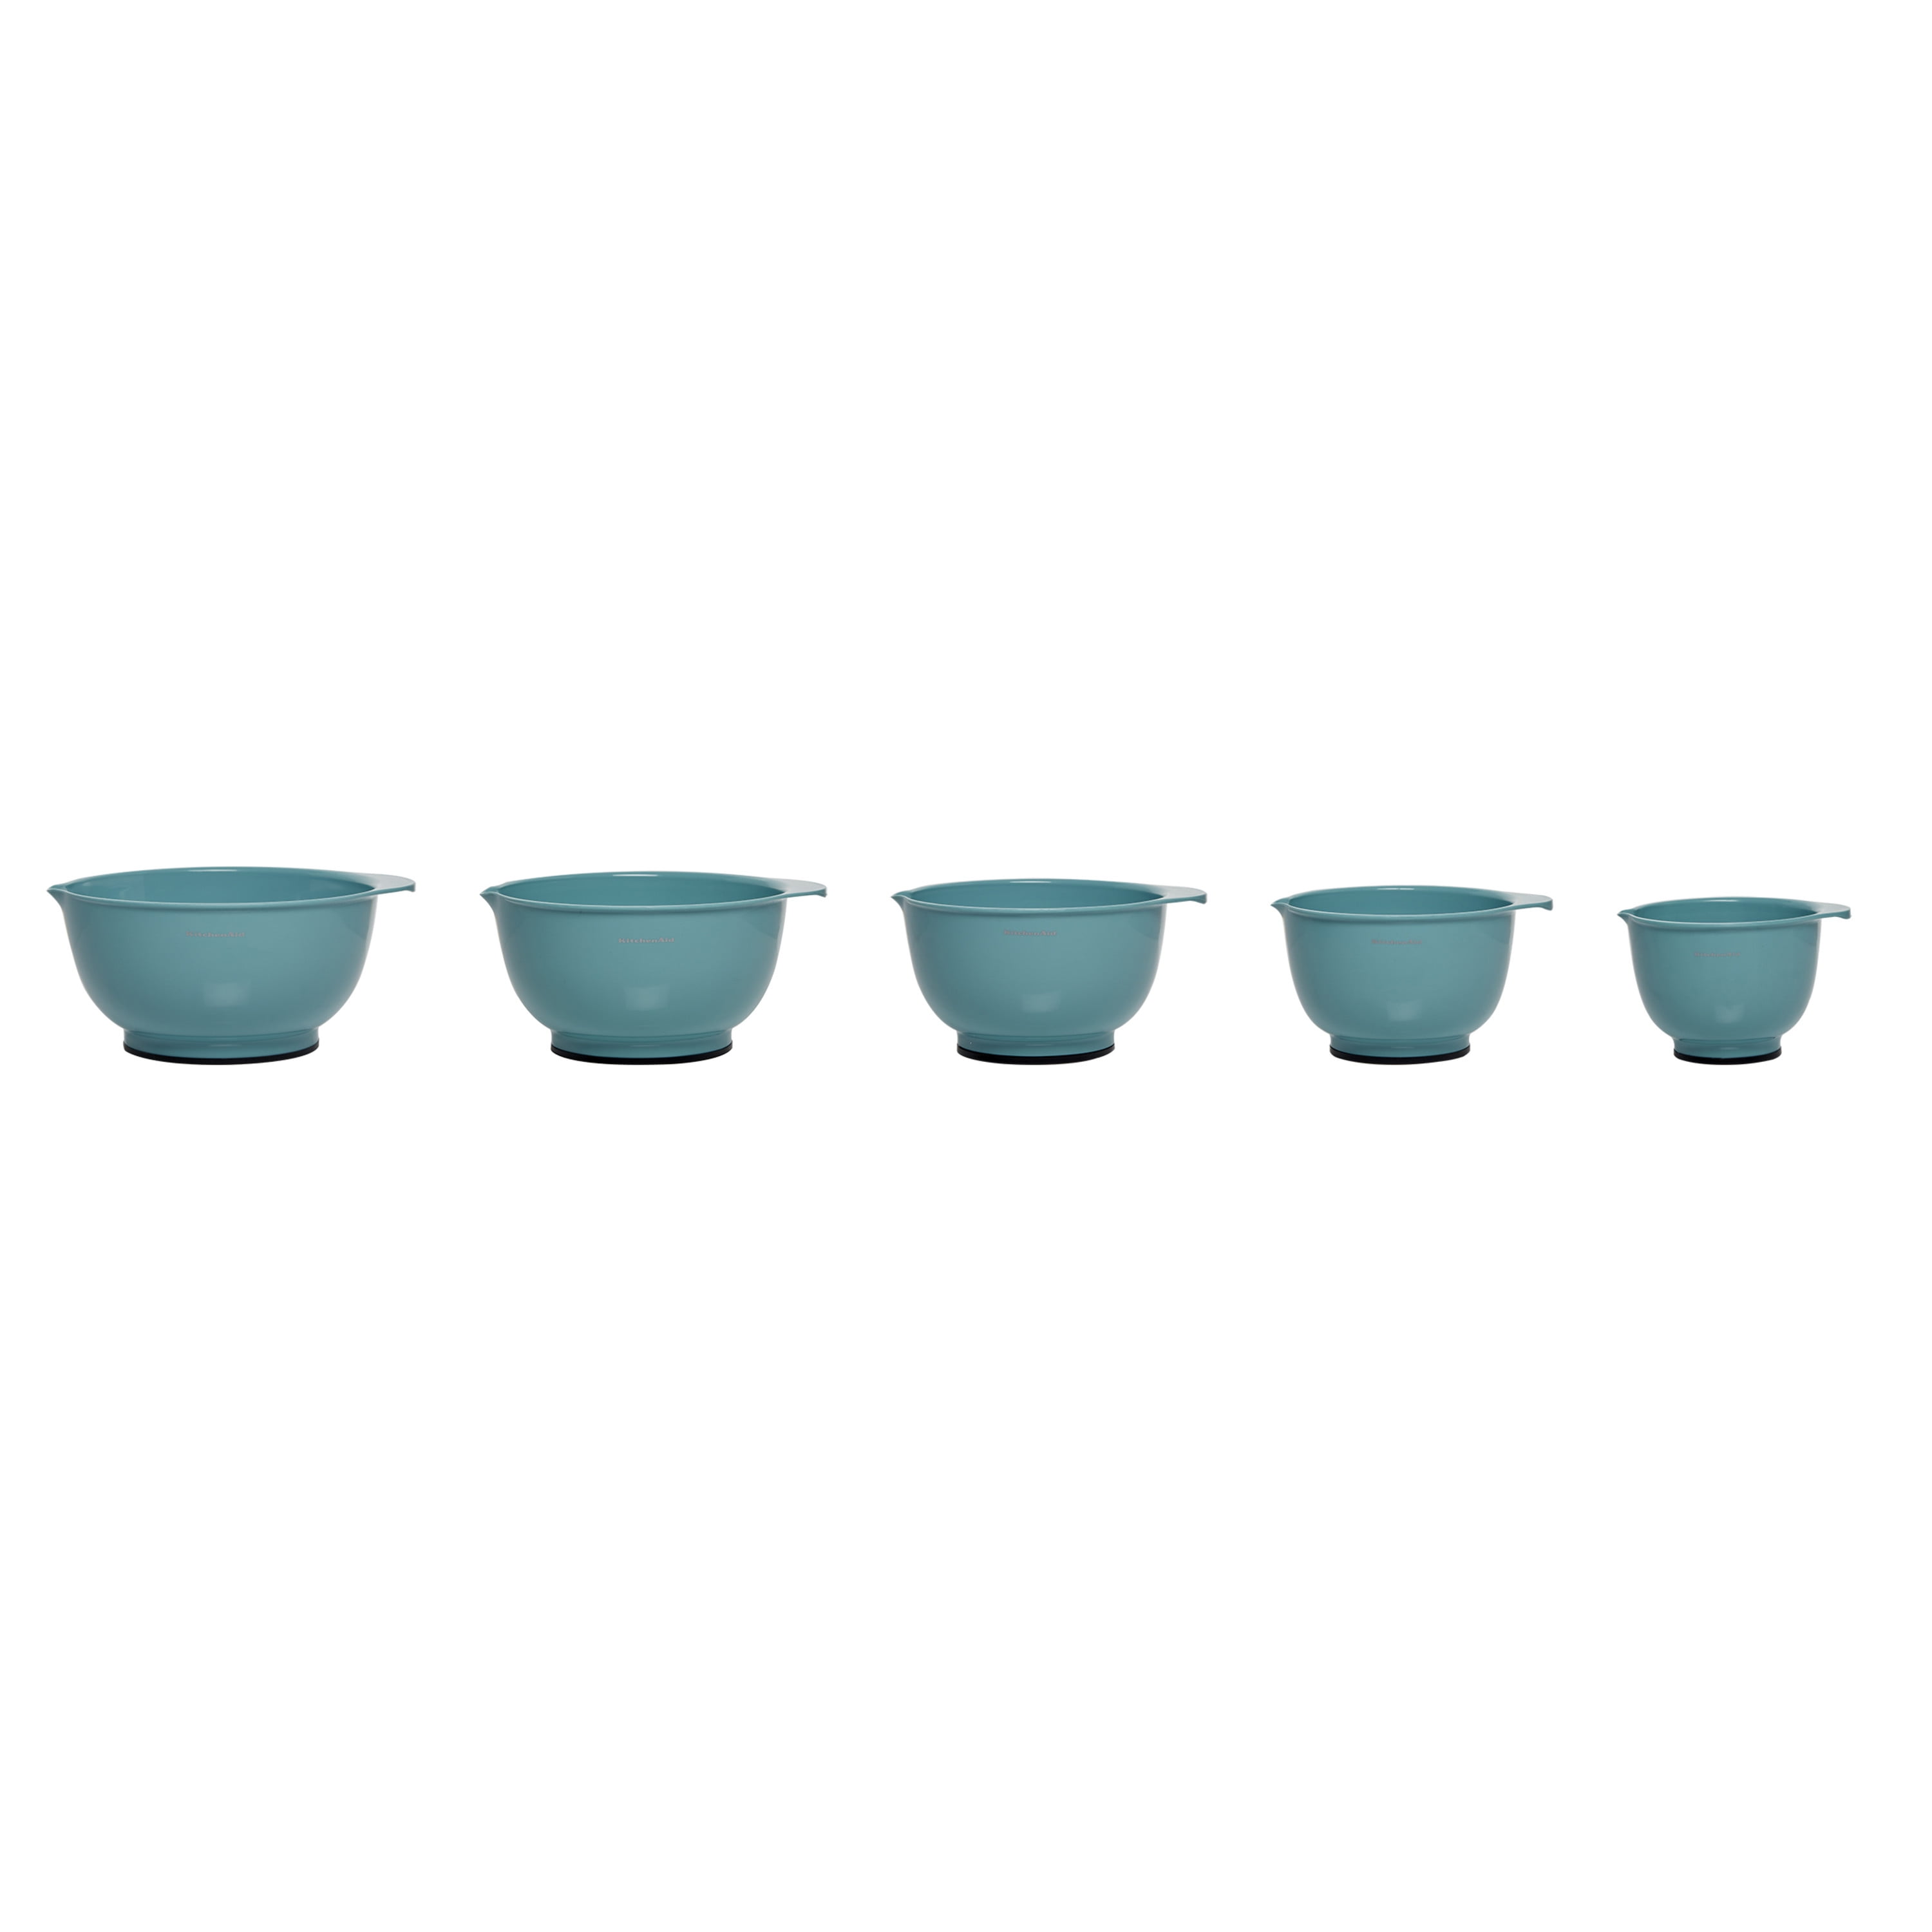 Kitchenaid Set of 5 Plastic Mixing Bowls in Aqua Sky with Rubber Bottom